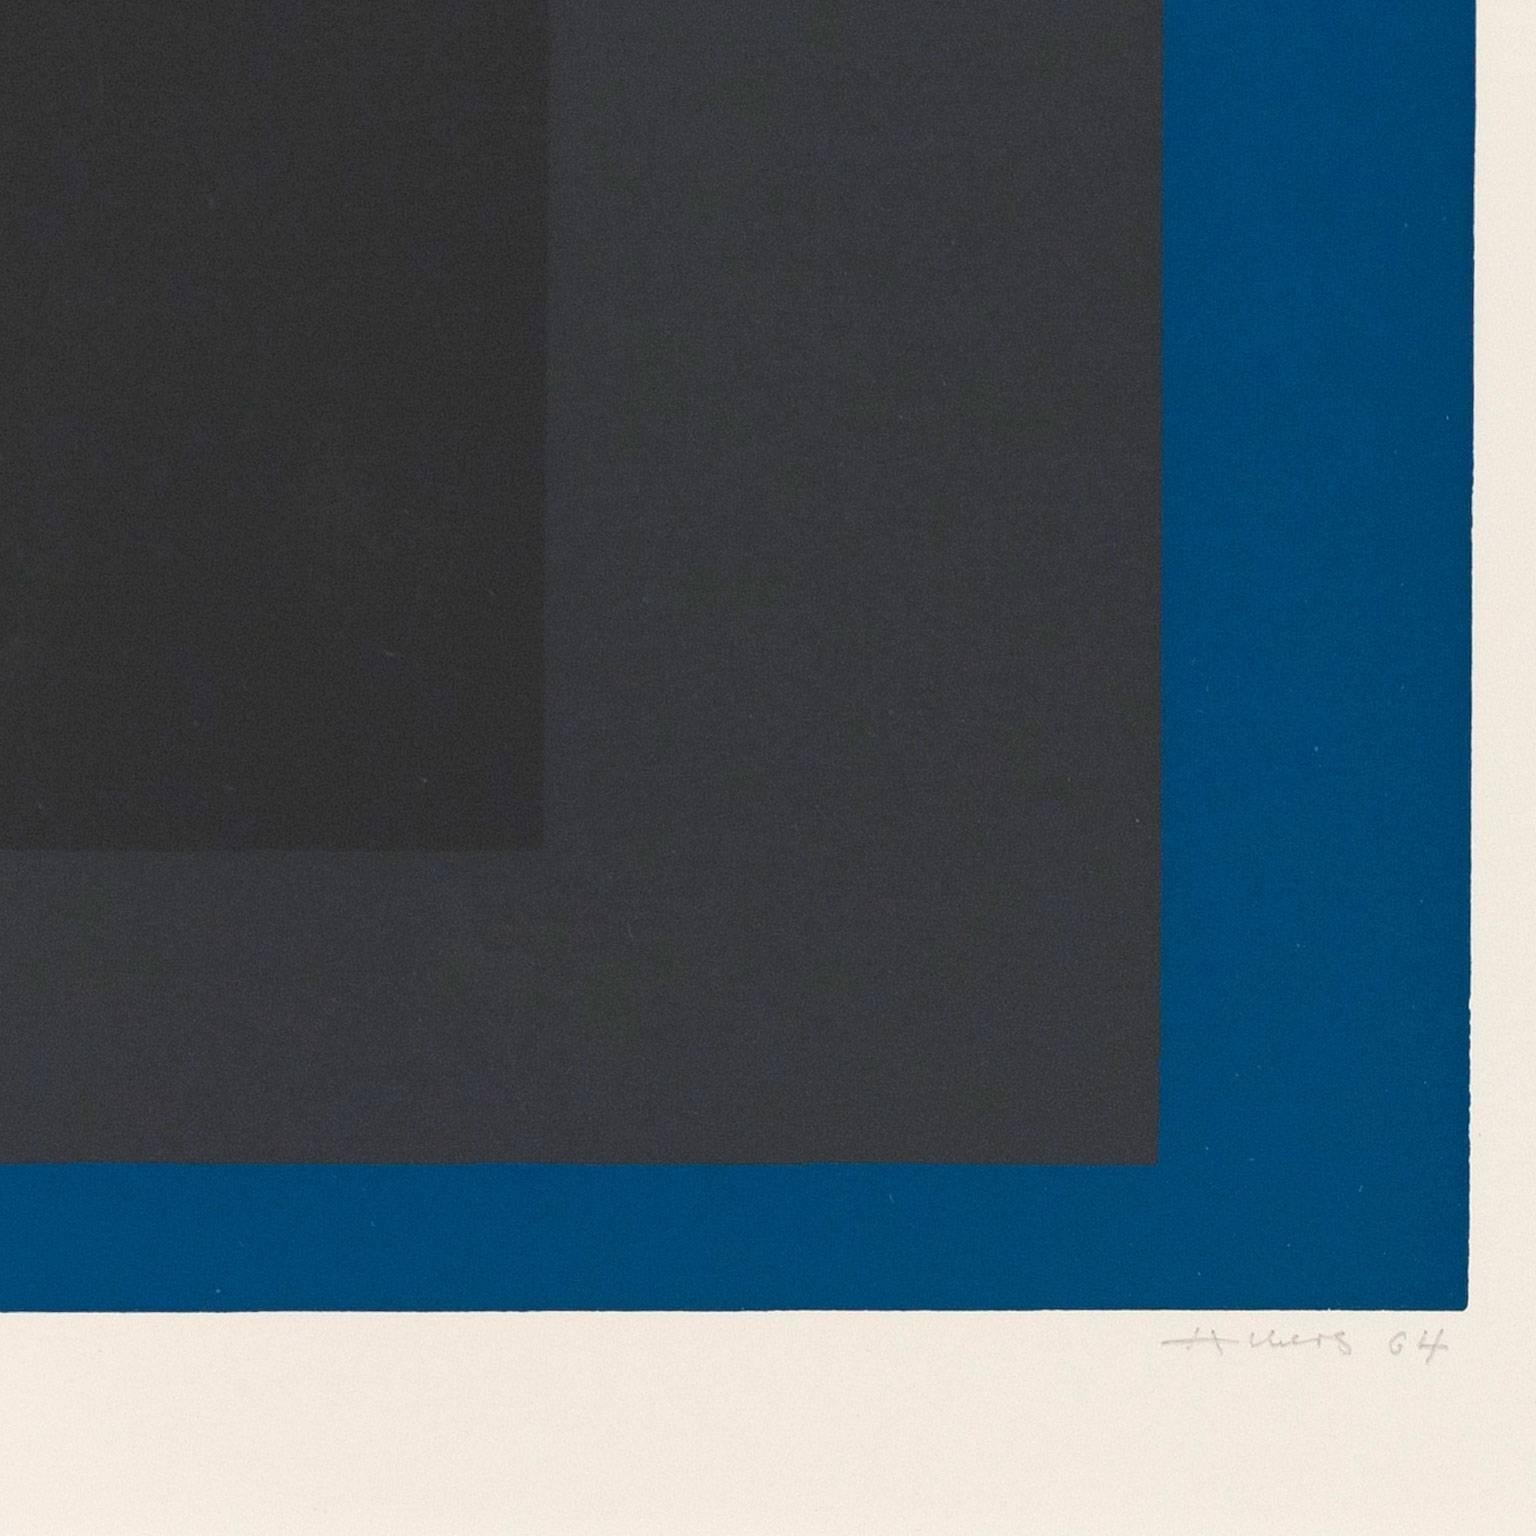 Slate and Sky  - Blue Abstract Print by Josef Albers